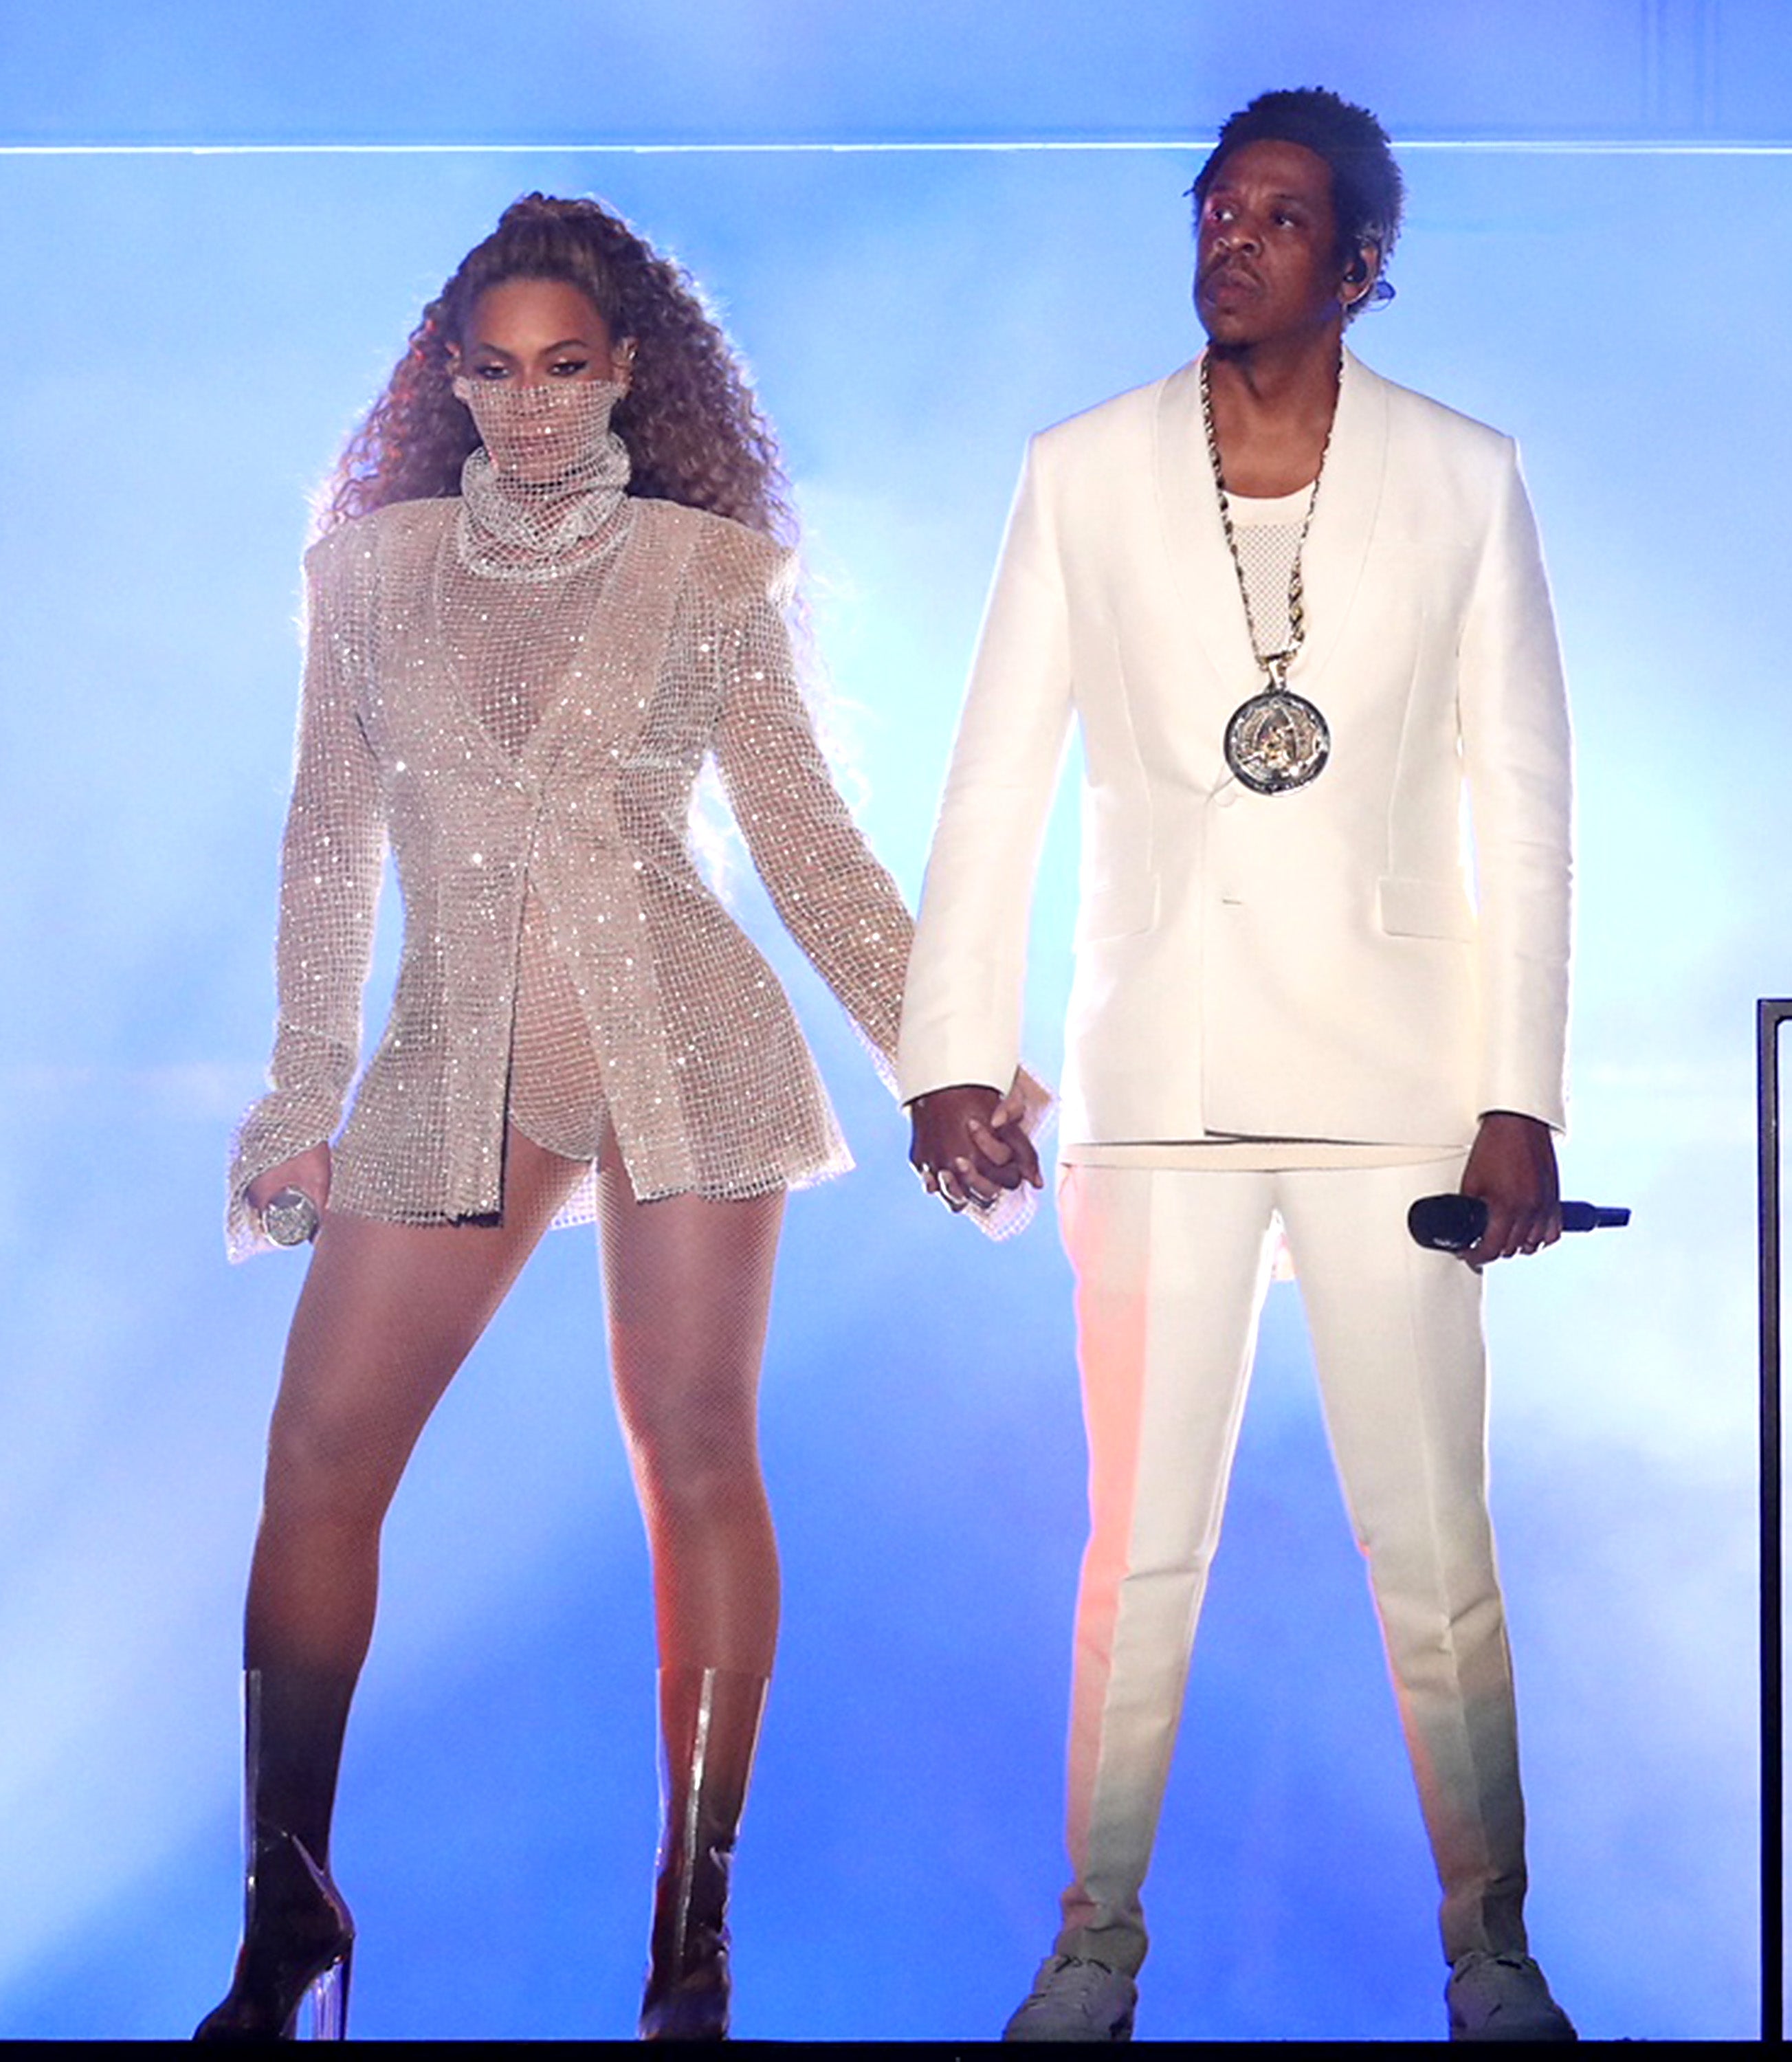 Dazzling Duo! Beyoncé And Jay-Z Return For OTR II And Bey’s Outfits Set The Stage On Fire
